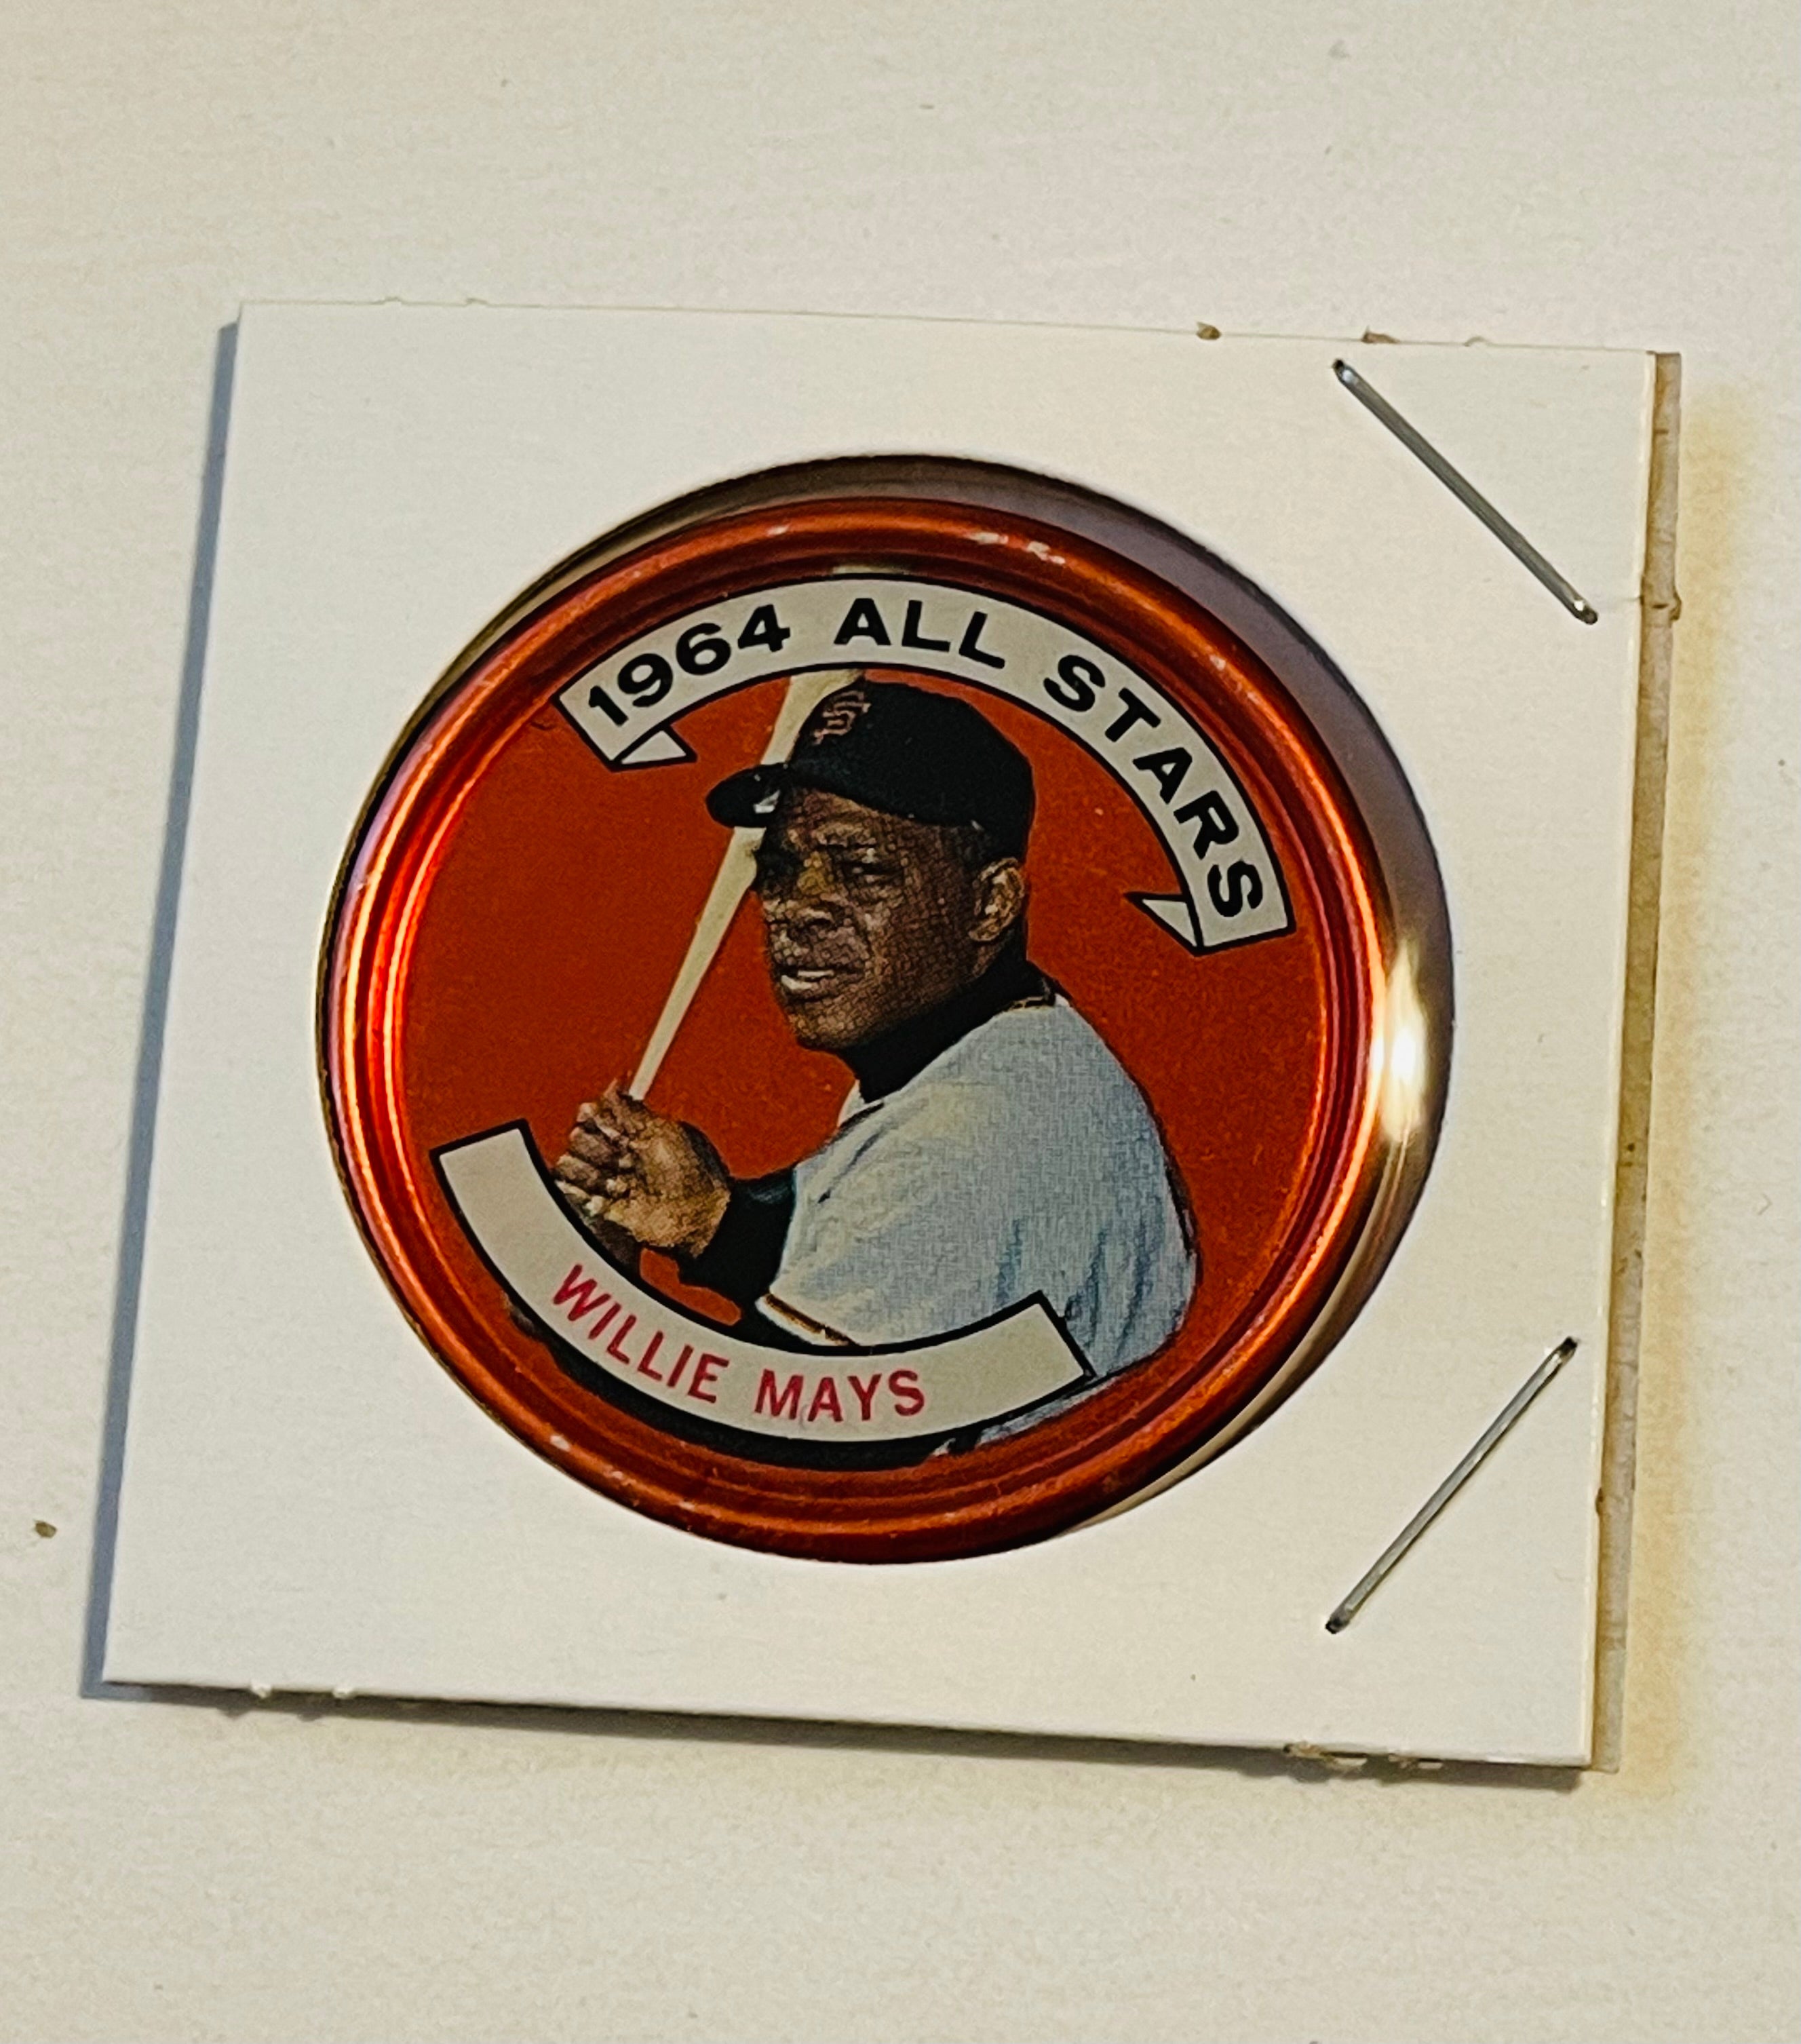 Willie Mays Topps baseball metal coin 1964